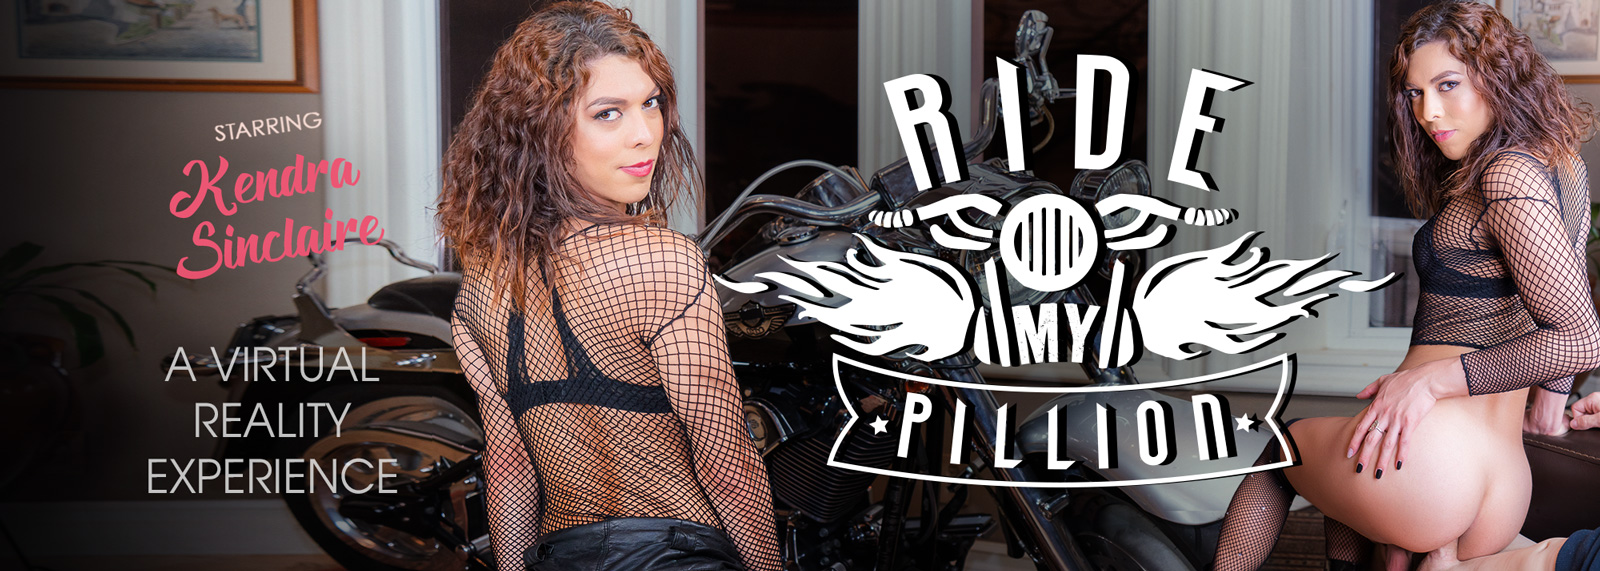 Ride My Pillion - VR Porn Video, Starring Kendra Sinclaire VR